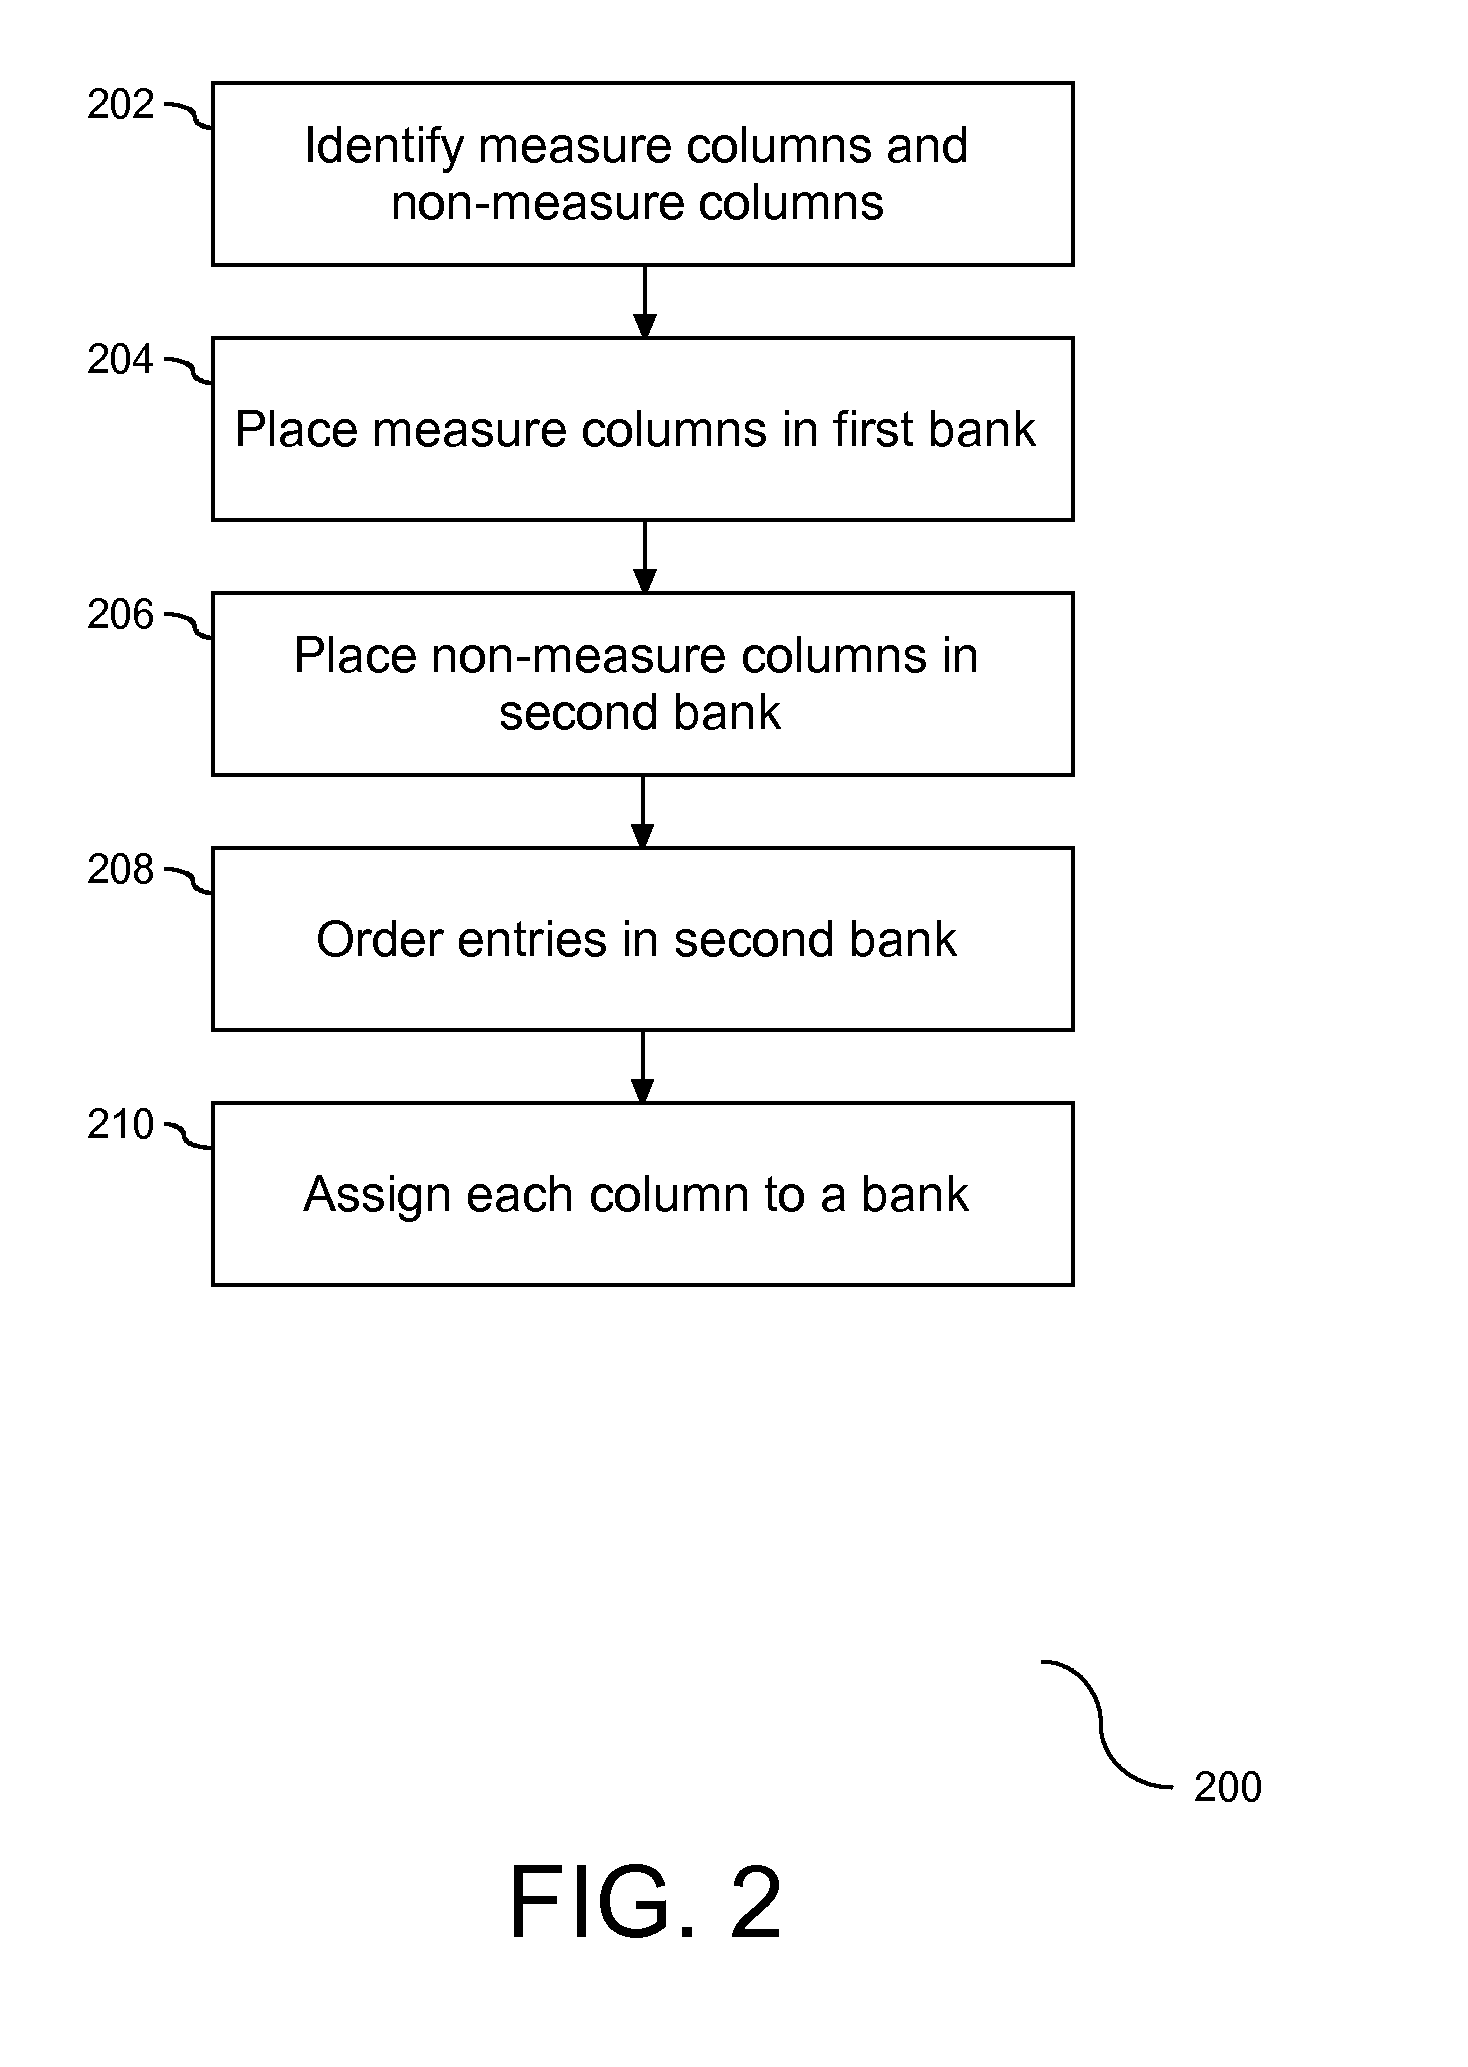 Method for laying out fields in a database in a hybrid of row-wise and column-wise ordering